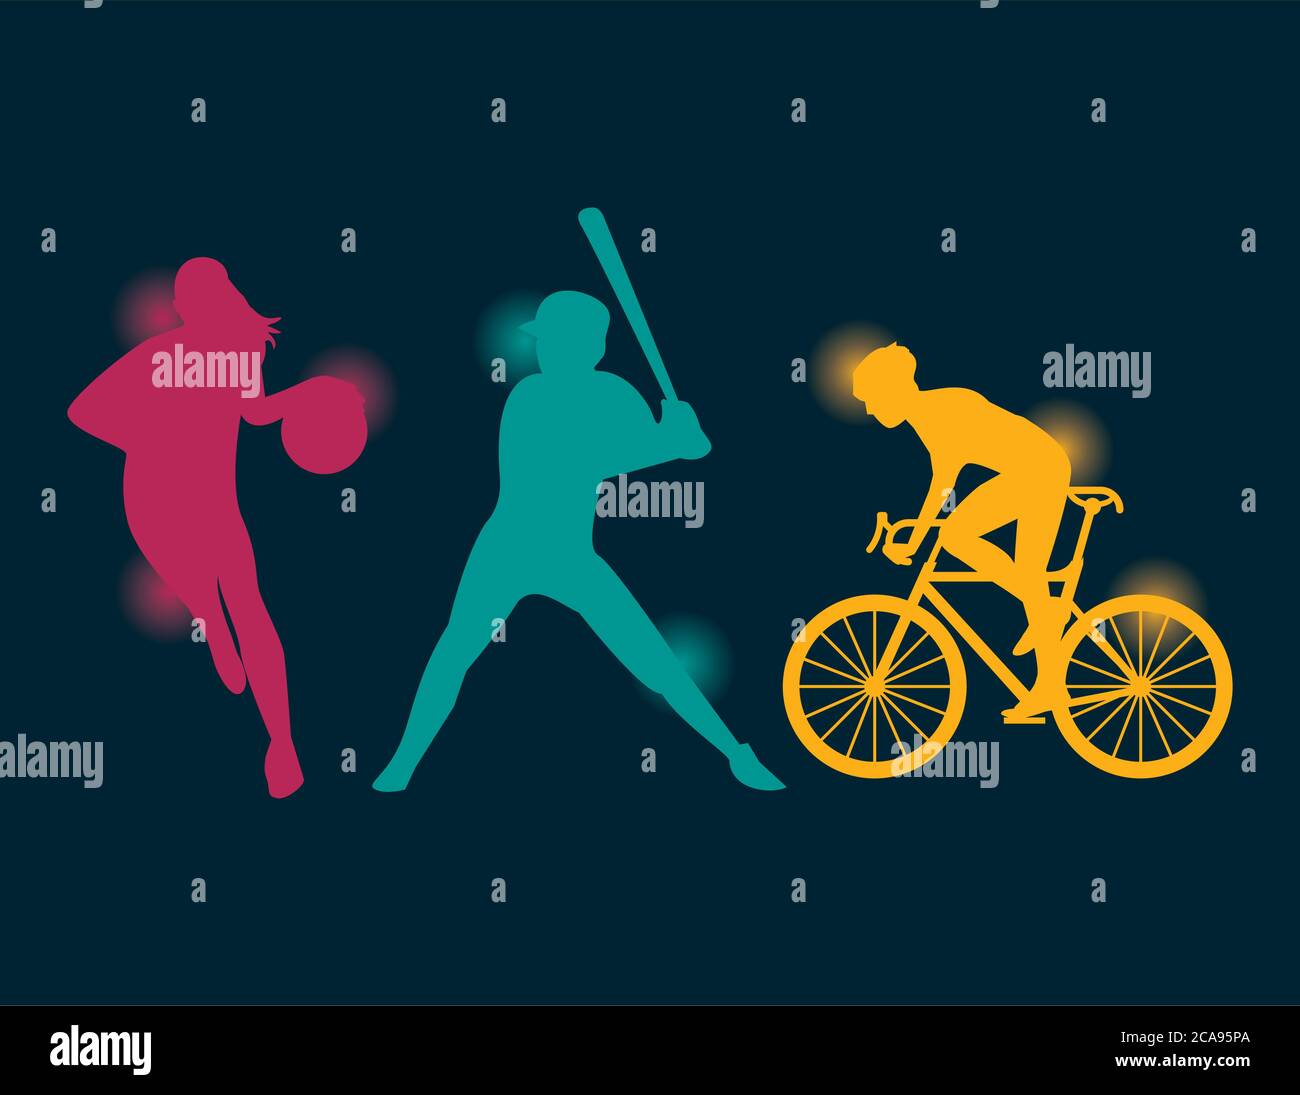 group of athletic people practicing sports silhouettes vector illustration design Stock Vector